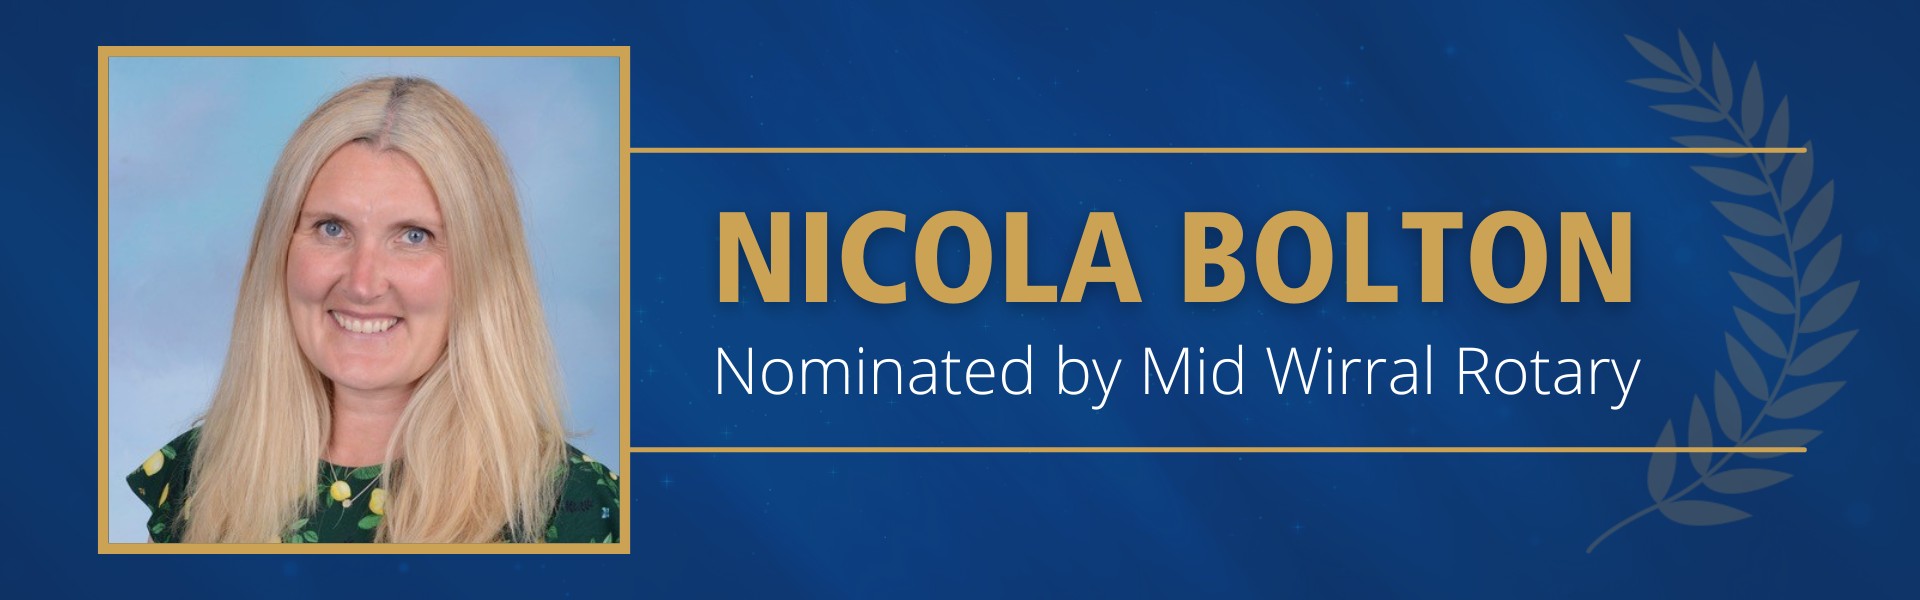 Nicola Bolton Nominated by Mid Wirral Rotary